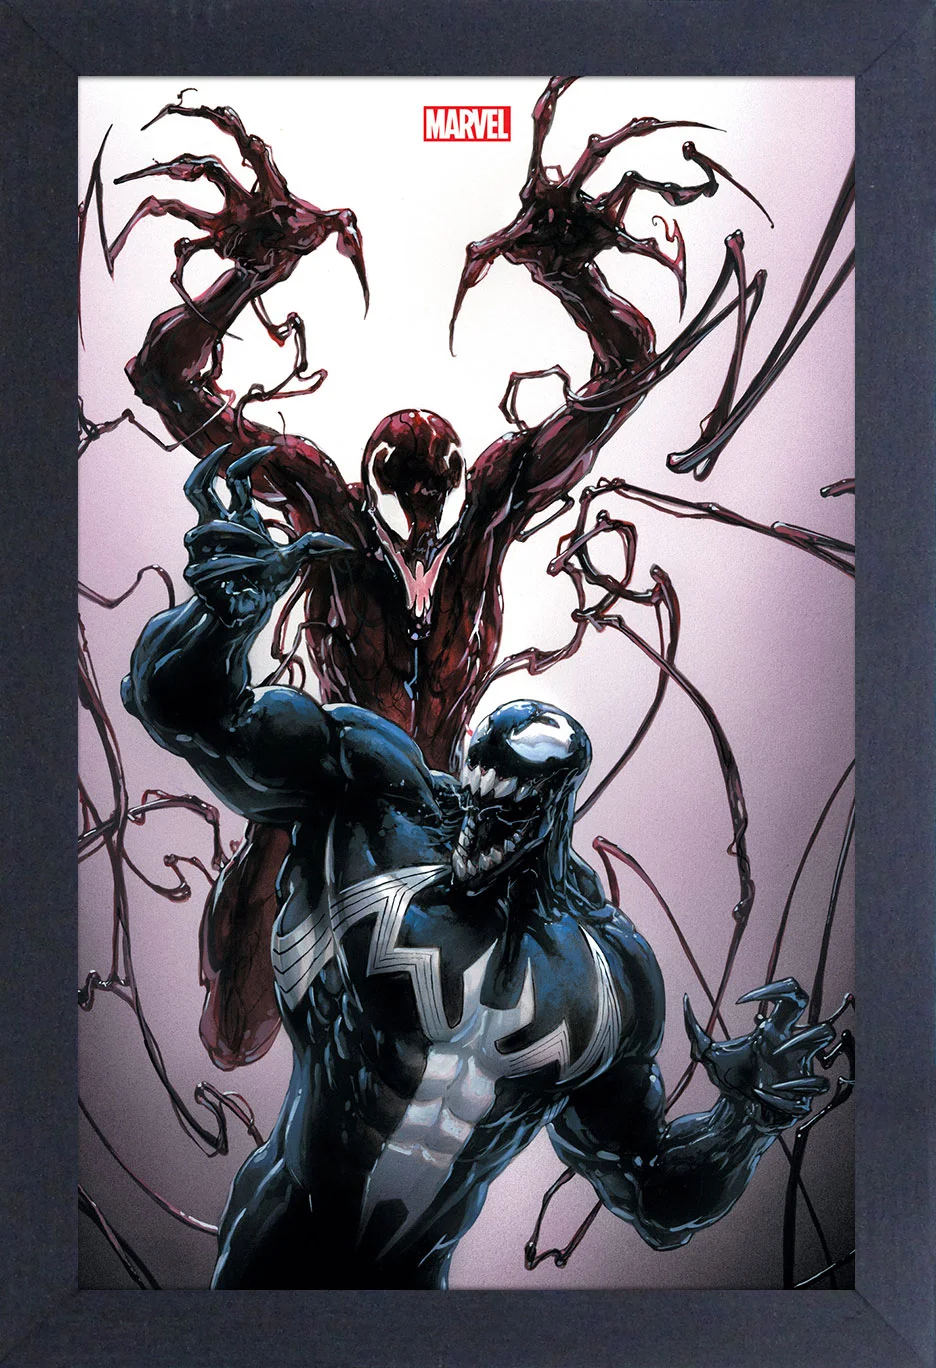 Marvel - Venom & Carnage Jump Scare (11"x17" Gel-Coat) (Order in multiples of 6, mix and match styles)